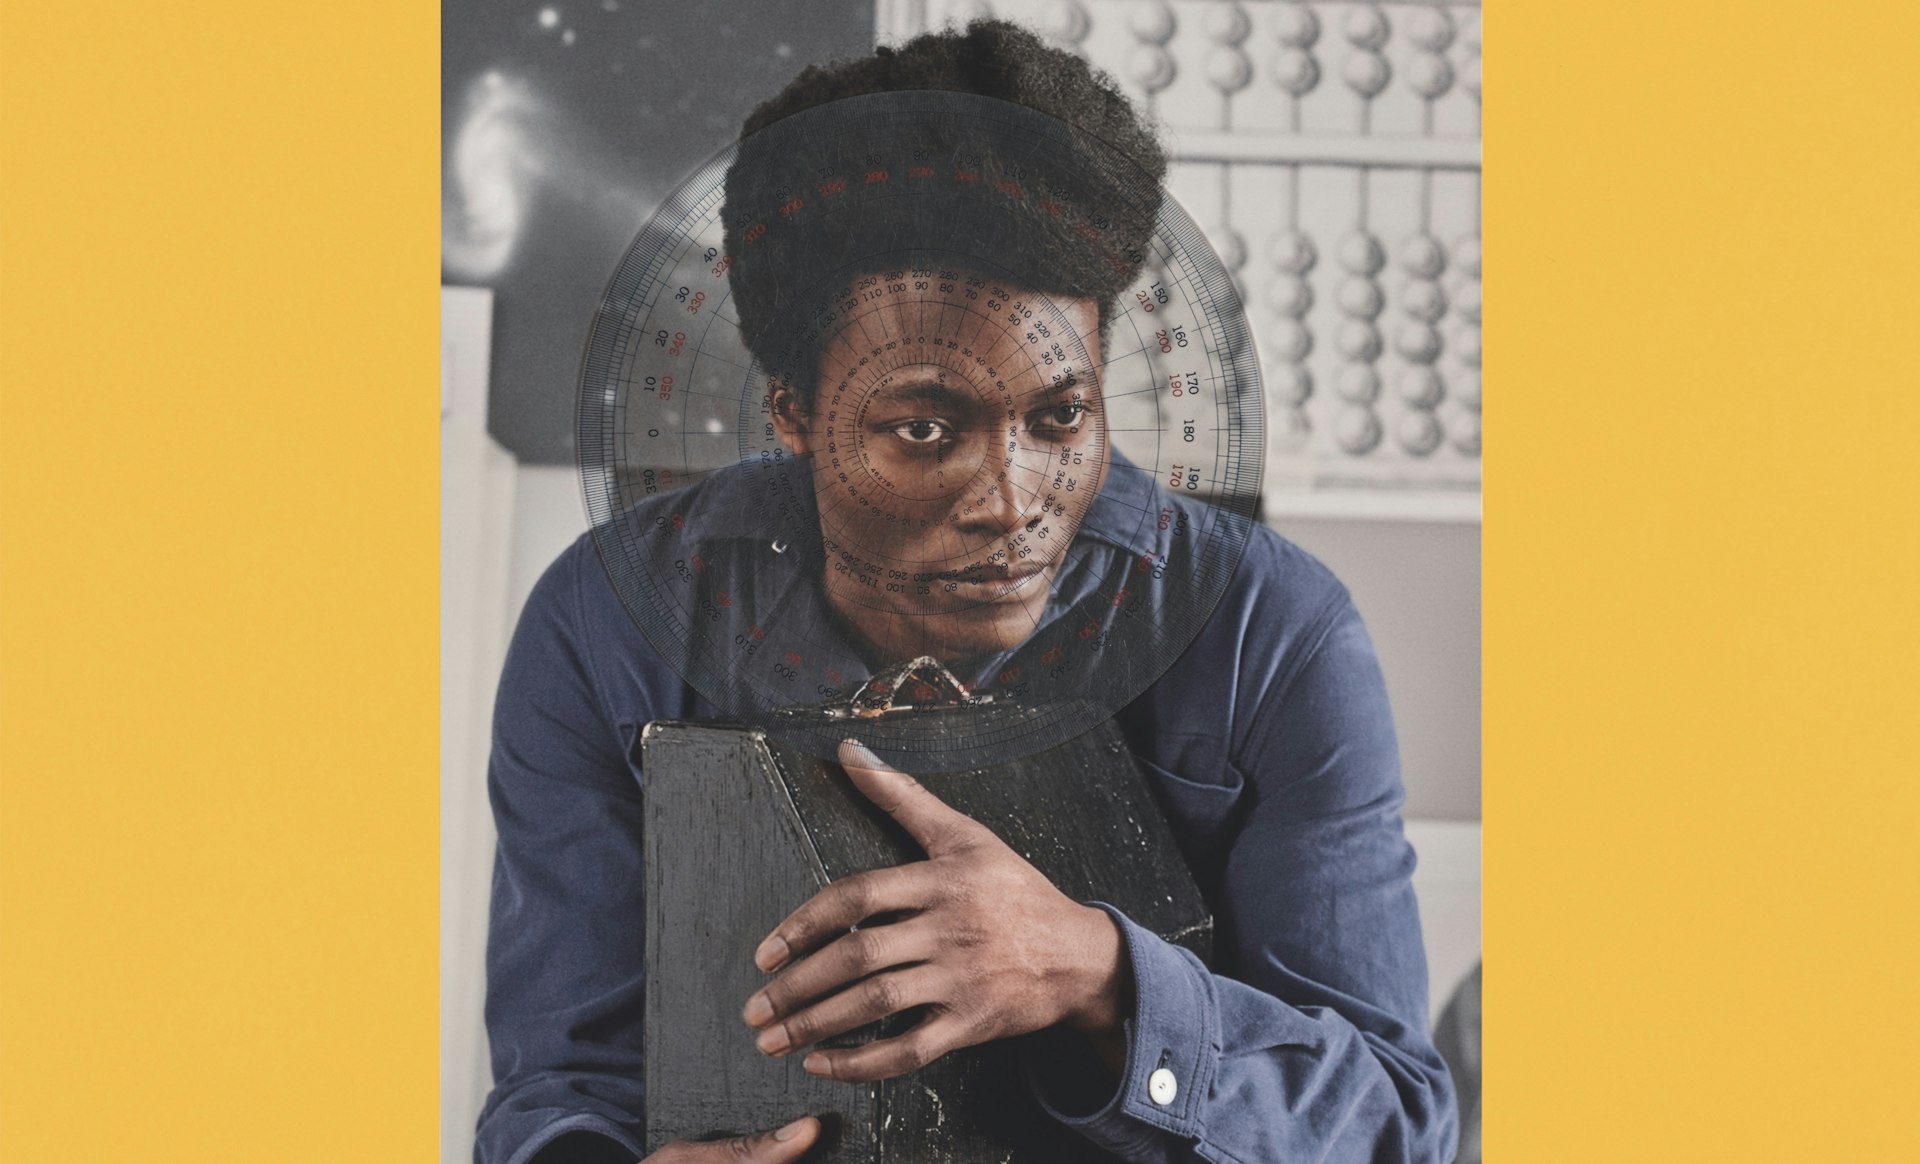 Benjamin Clementine on love, music and life as an outsider